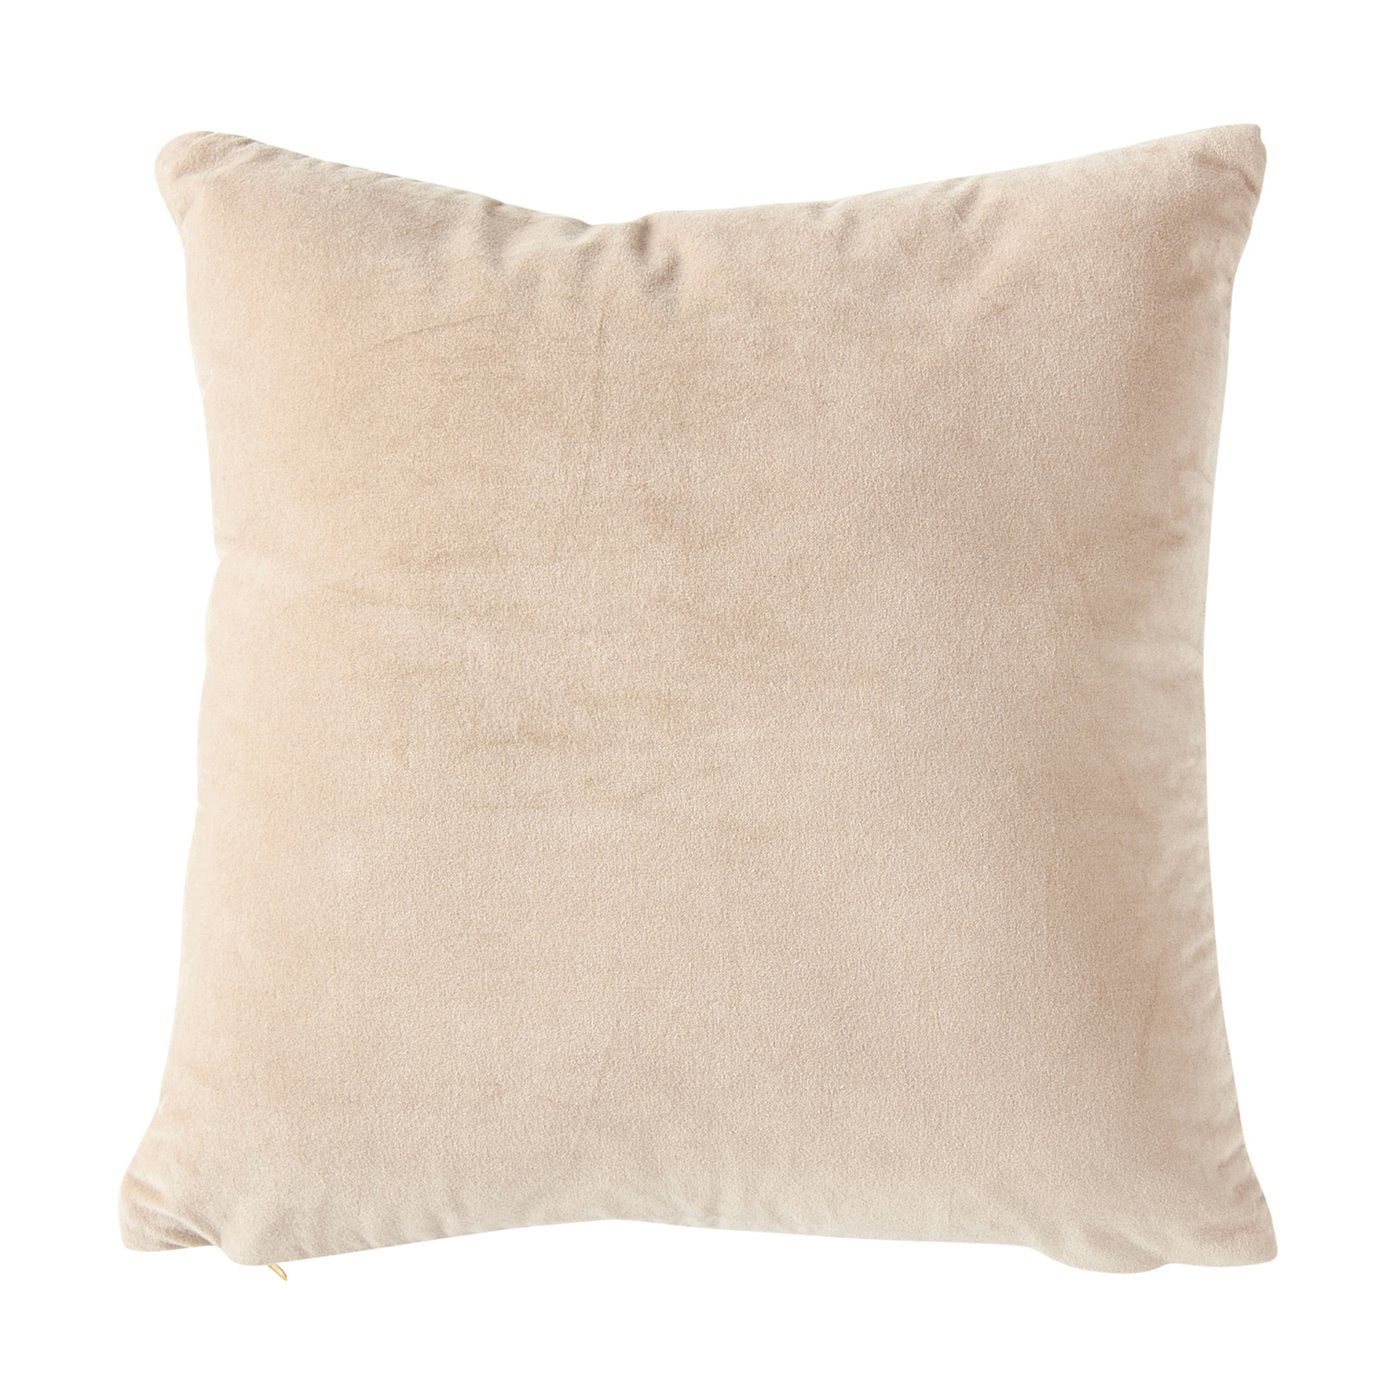 Square Taupe Cotton Velvet Pillow with Cream Back